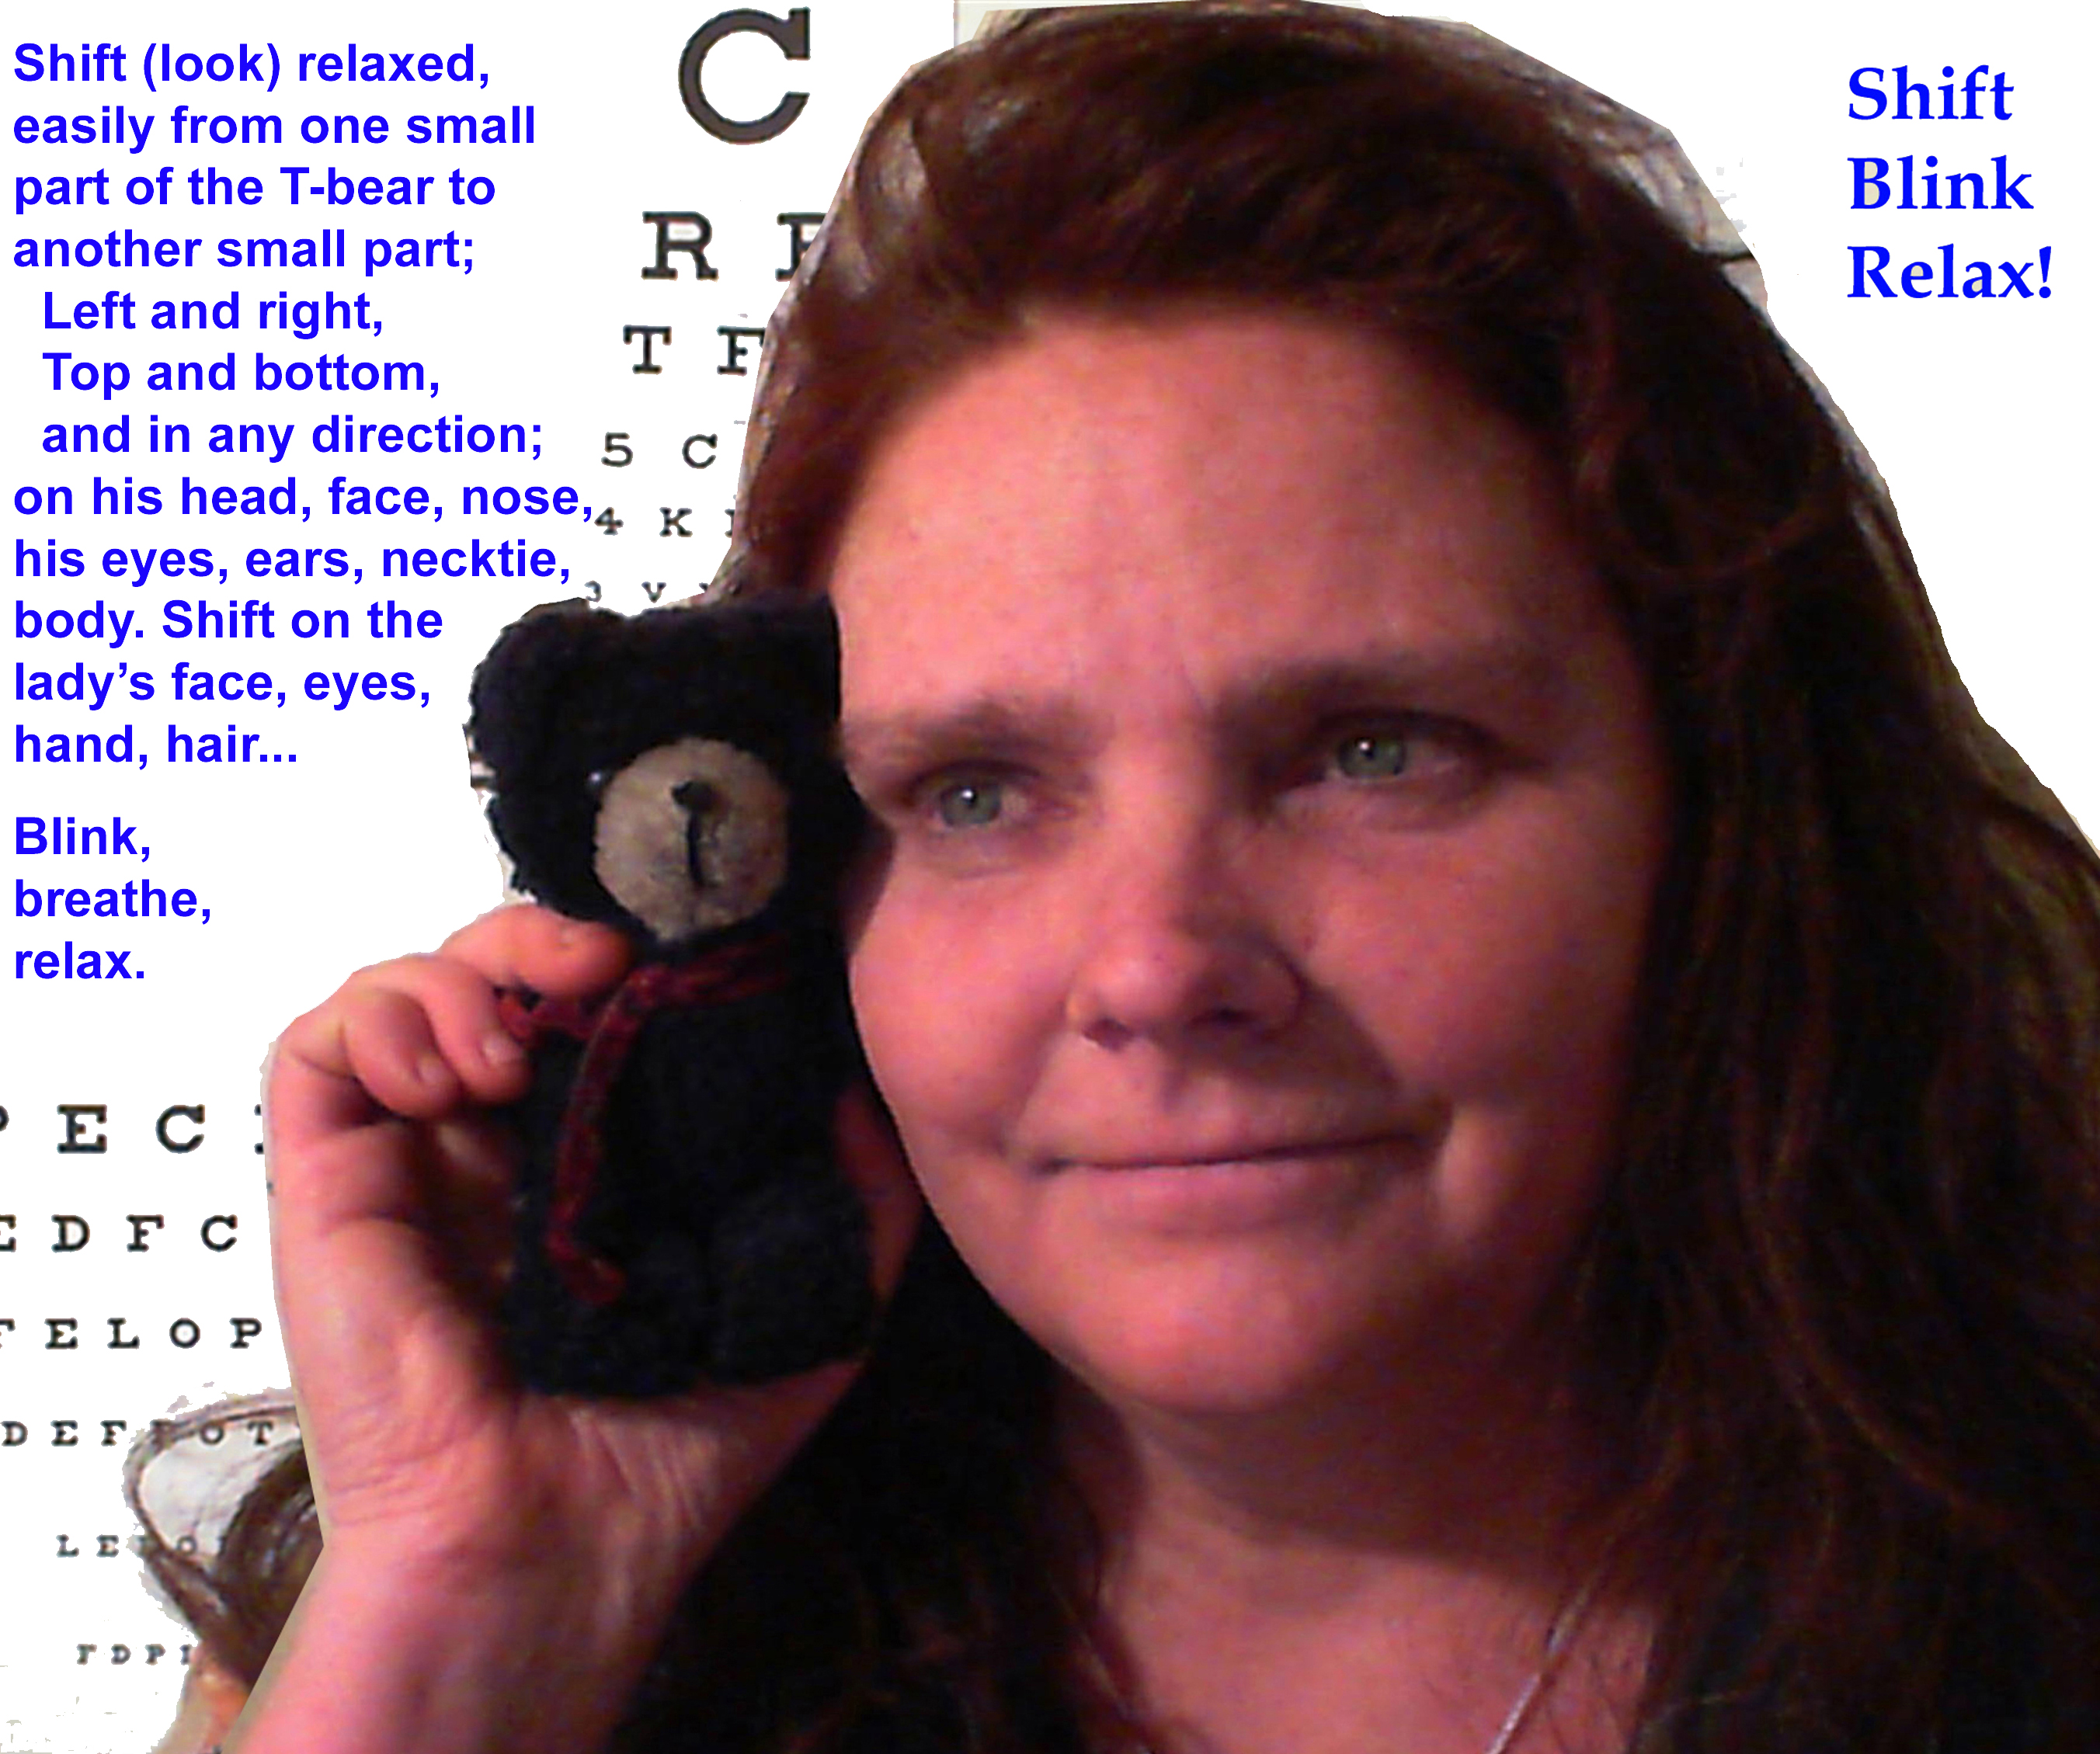 Website, book Author Mary I. Oliver (Pen Name-Clark Night) teaching Natural Eyesight Improvement with T-Bear! For kids and Adults.